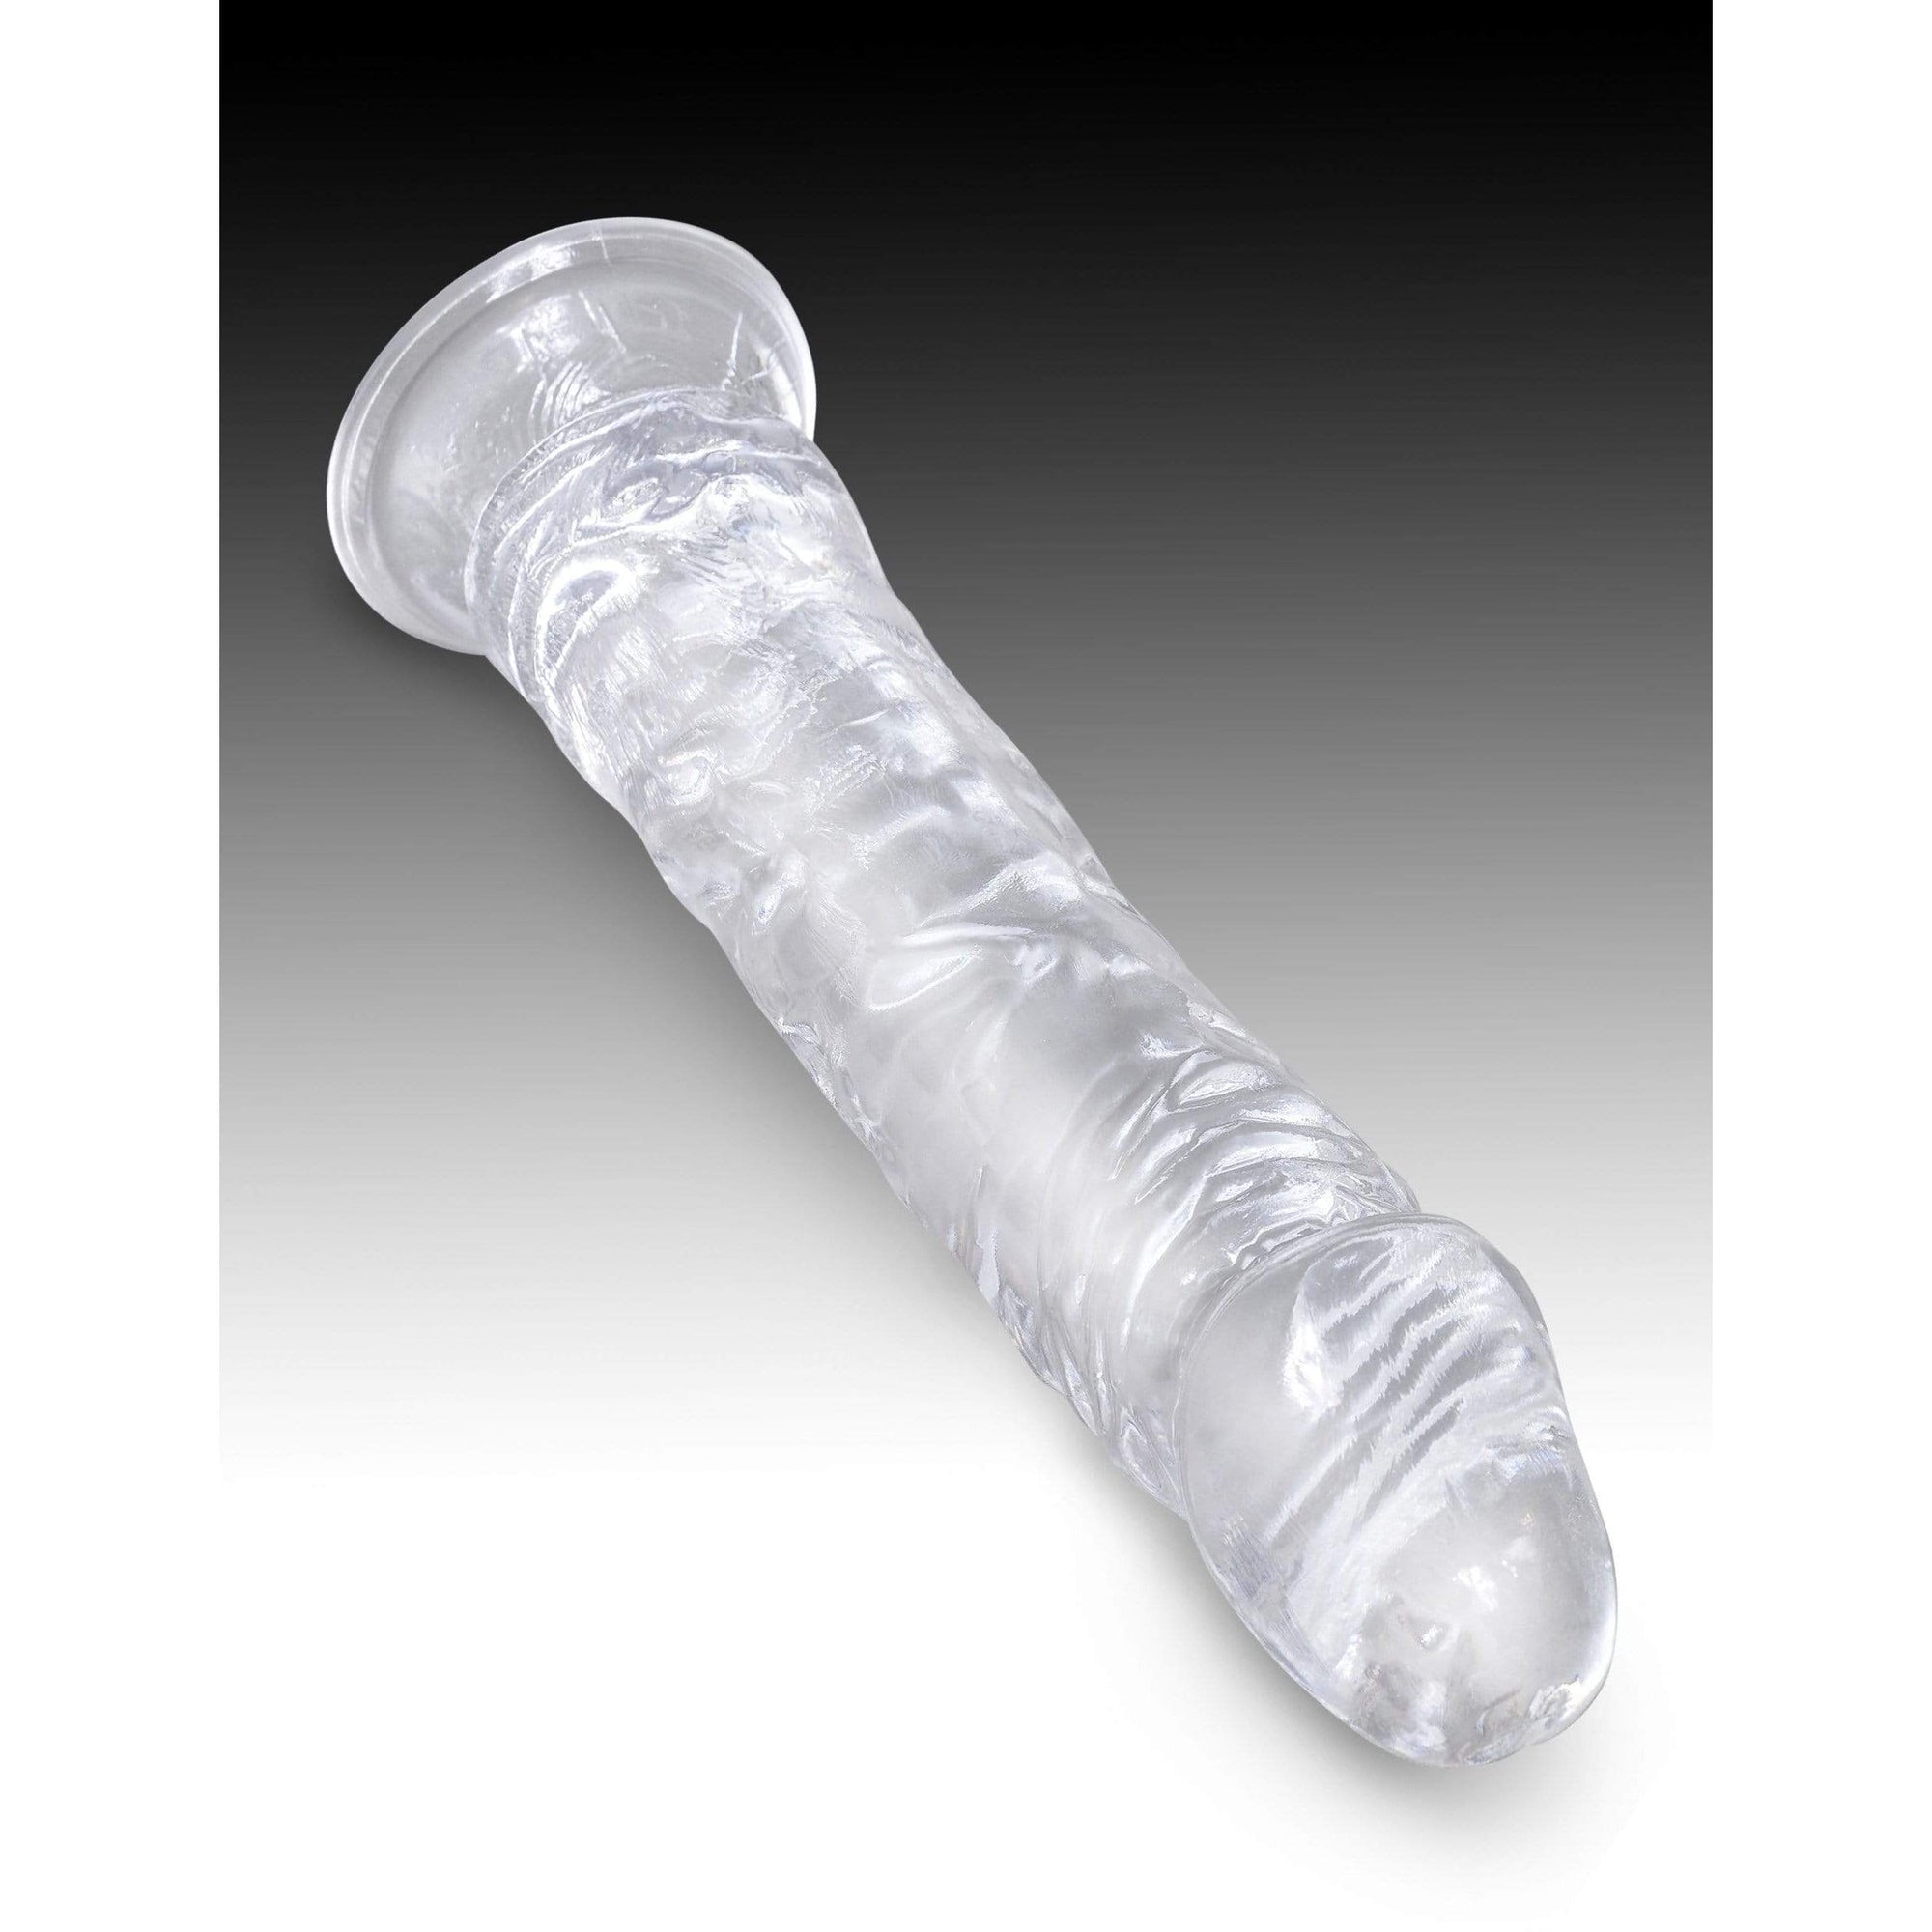 Pipedream - King Cock Clear Cock Dildo 8" (Clear) Realistic Dildo with suction cup (Non Vibration) 603912759013 CherryAffairs